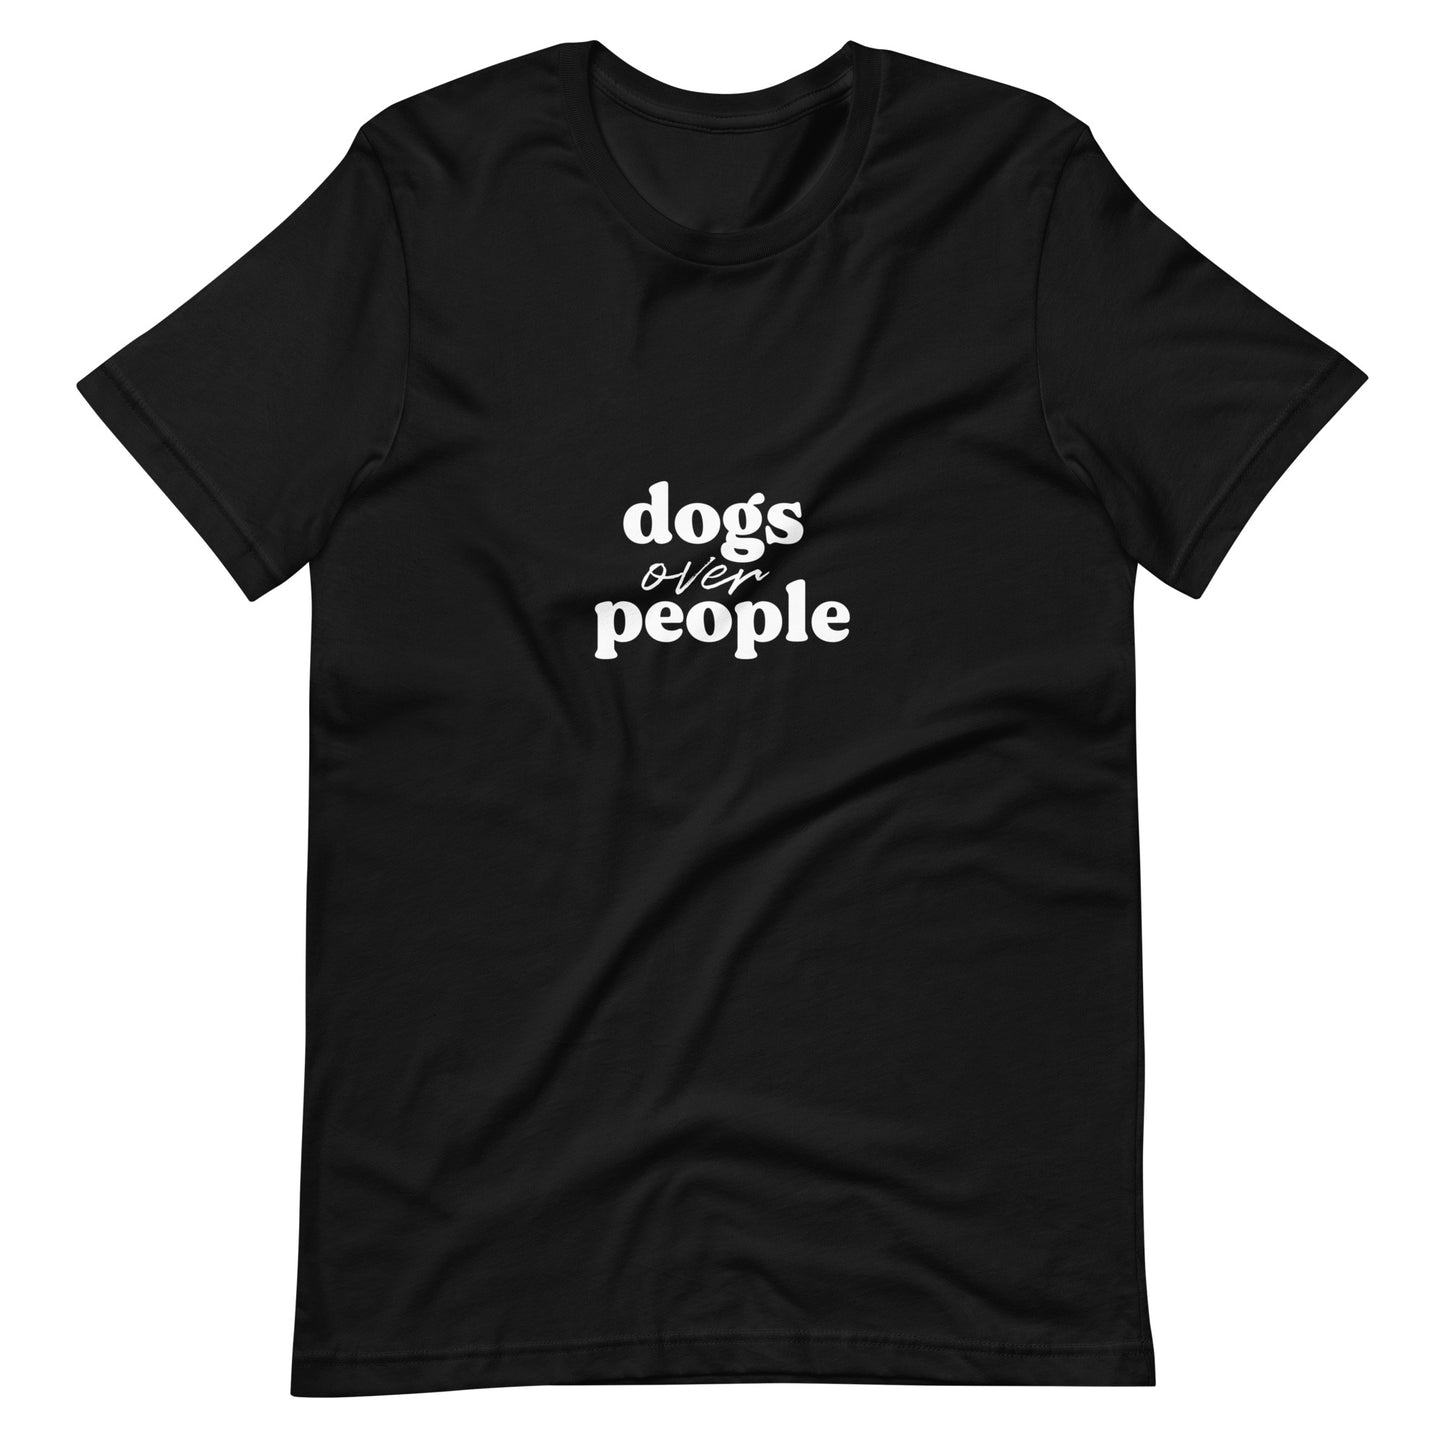 "Dogs Over People" Shirt